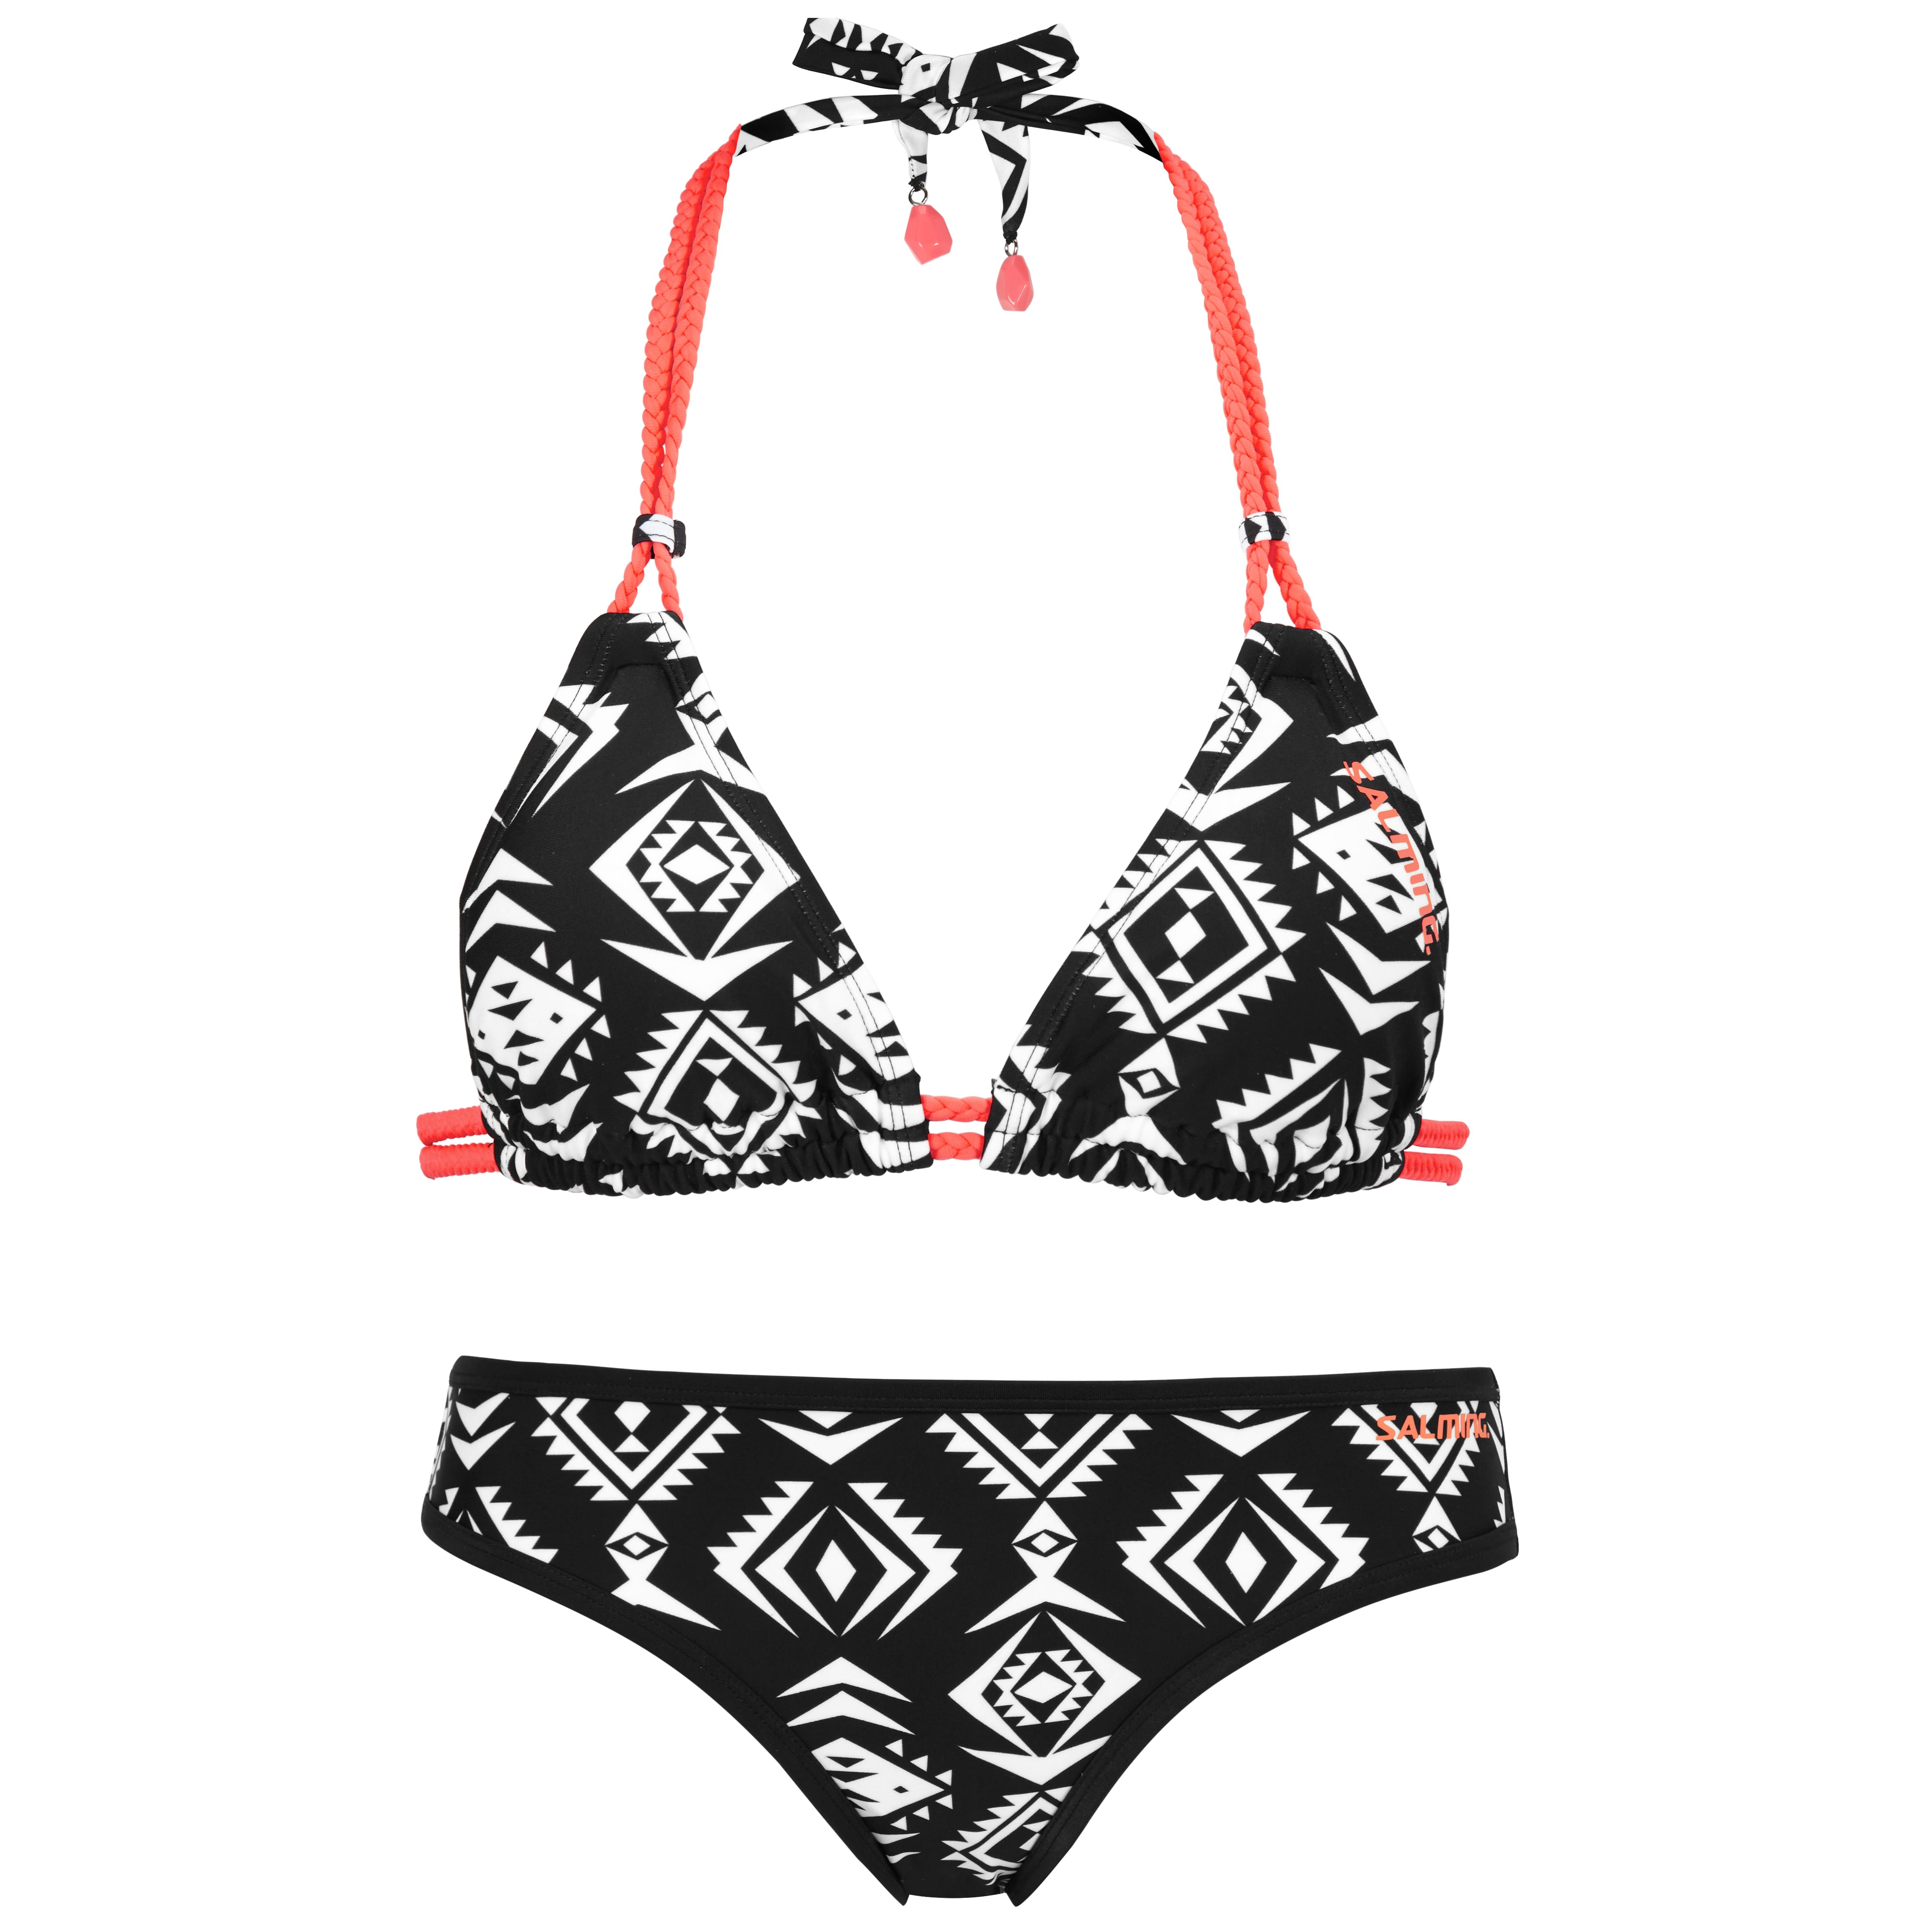 Ridiculous Summit Sports Buy Salming Ethnic Bikini Set from Outnorth